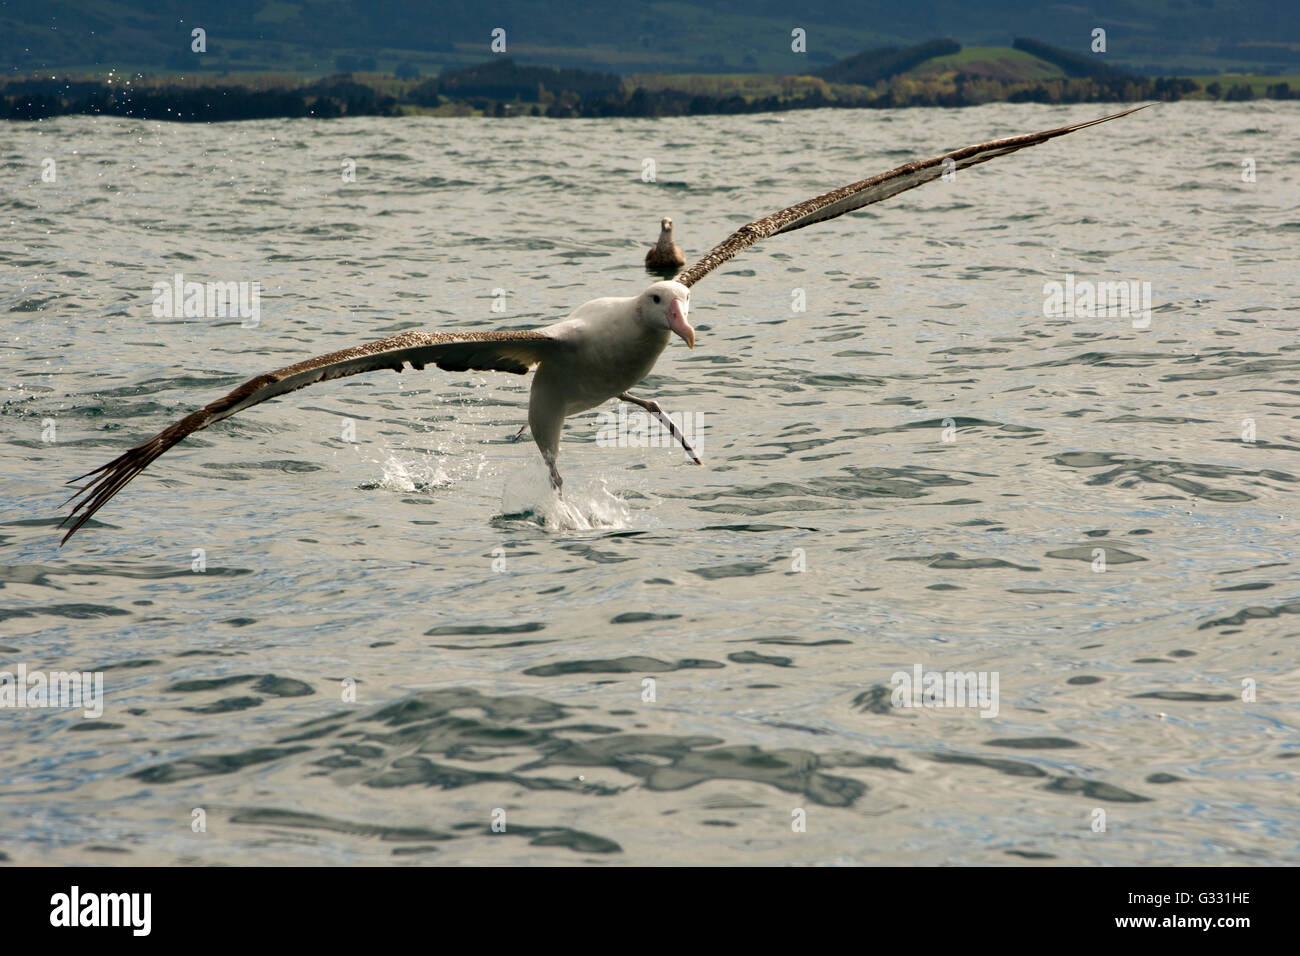 Wandering Albatross starting from the Pacific Ocean near the coast of Kaikoura in New Zealand. Stock Photo